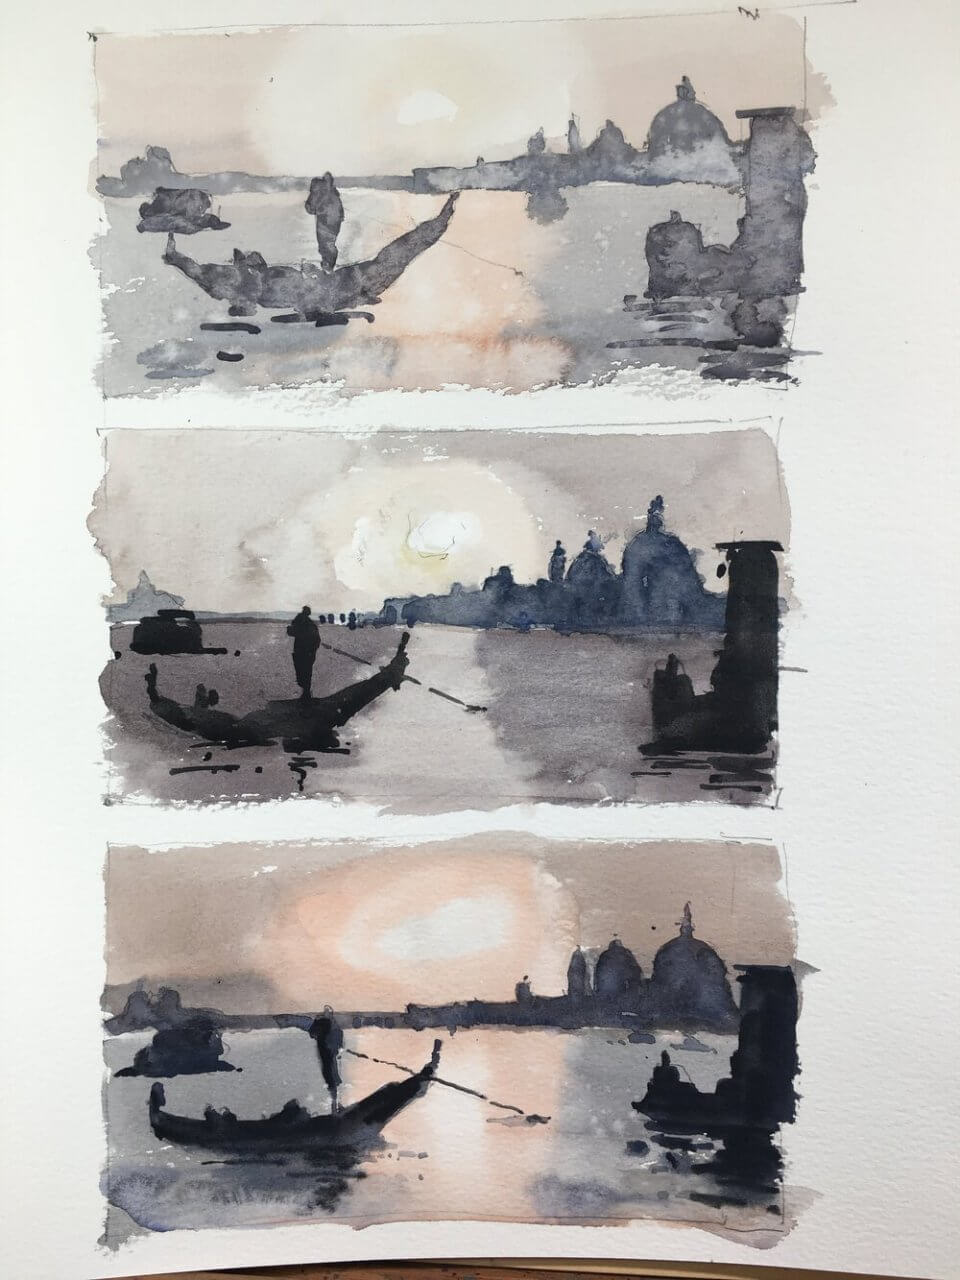 Venice watercolor value studies by Michele Clamp